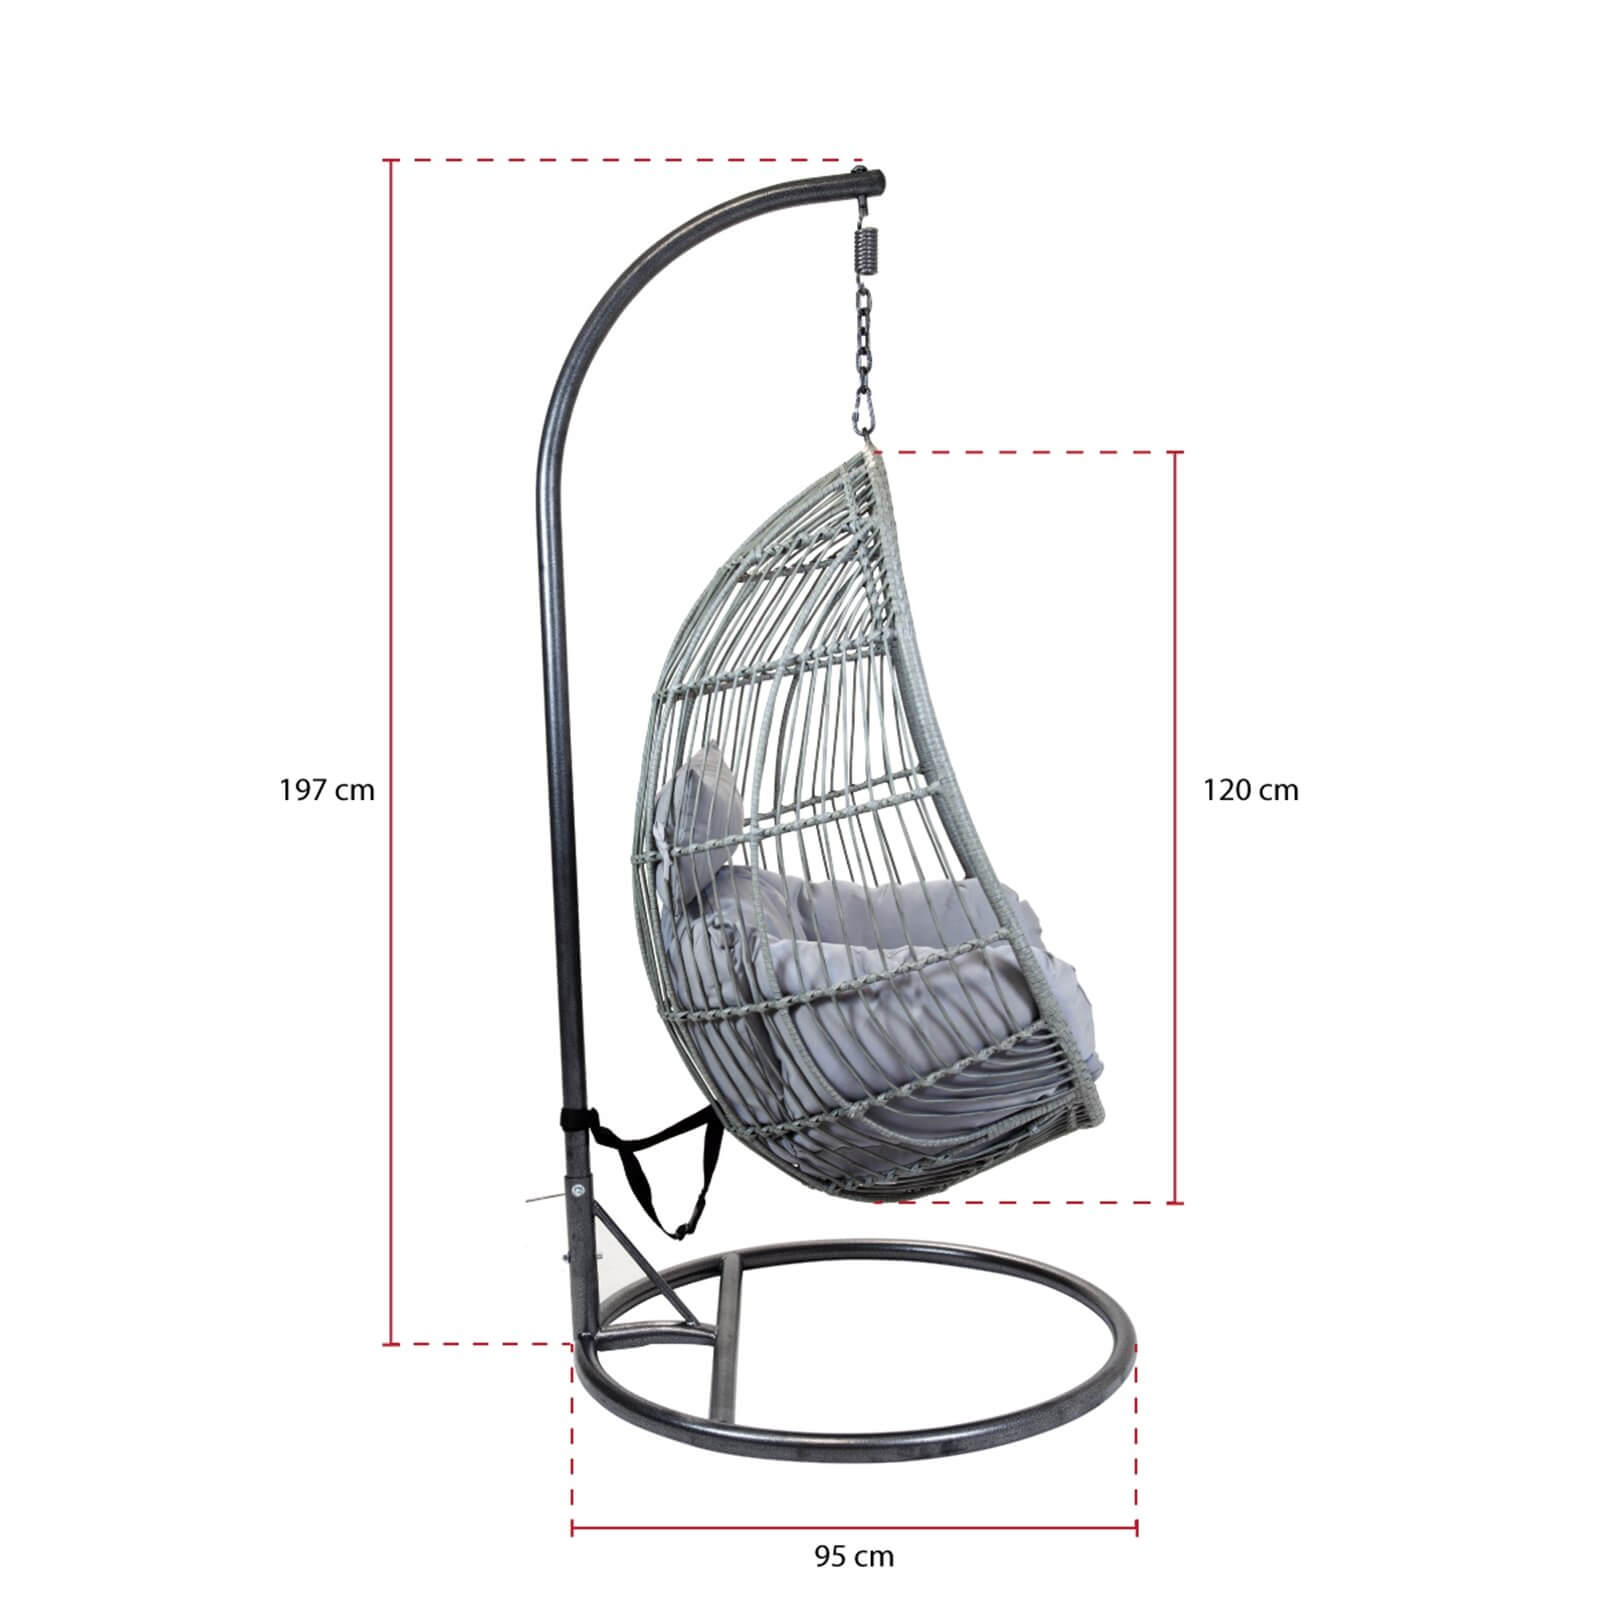 Charles Bentley Rattan Egg Shaped Hanging Chair with Cushions - Grey